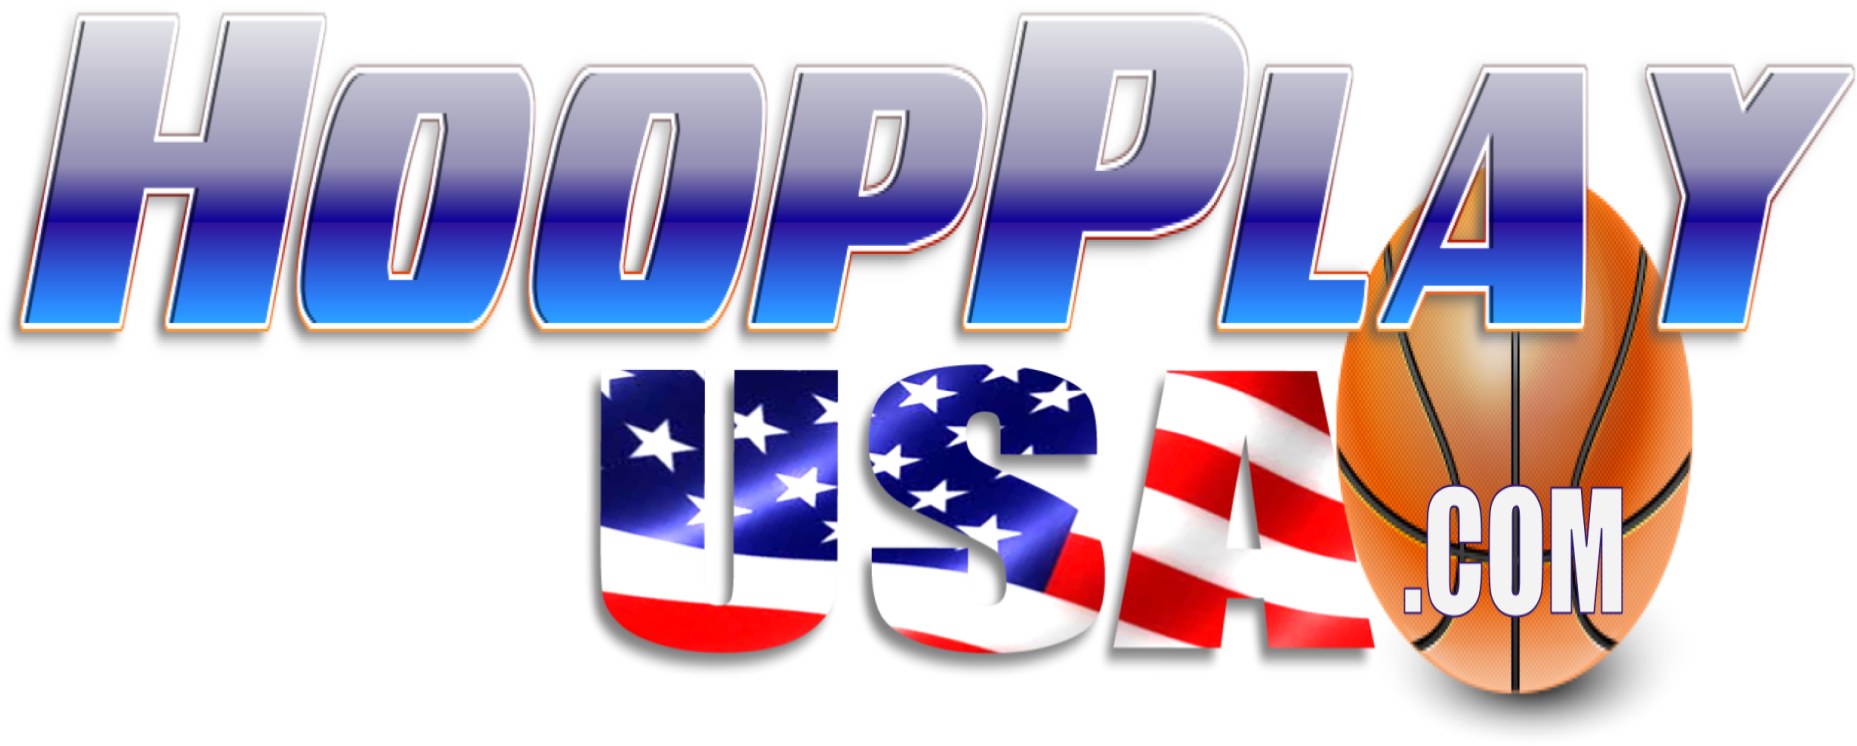 Hoopplay Street Logo Png - United States Of America (1920x1920), Png Download